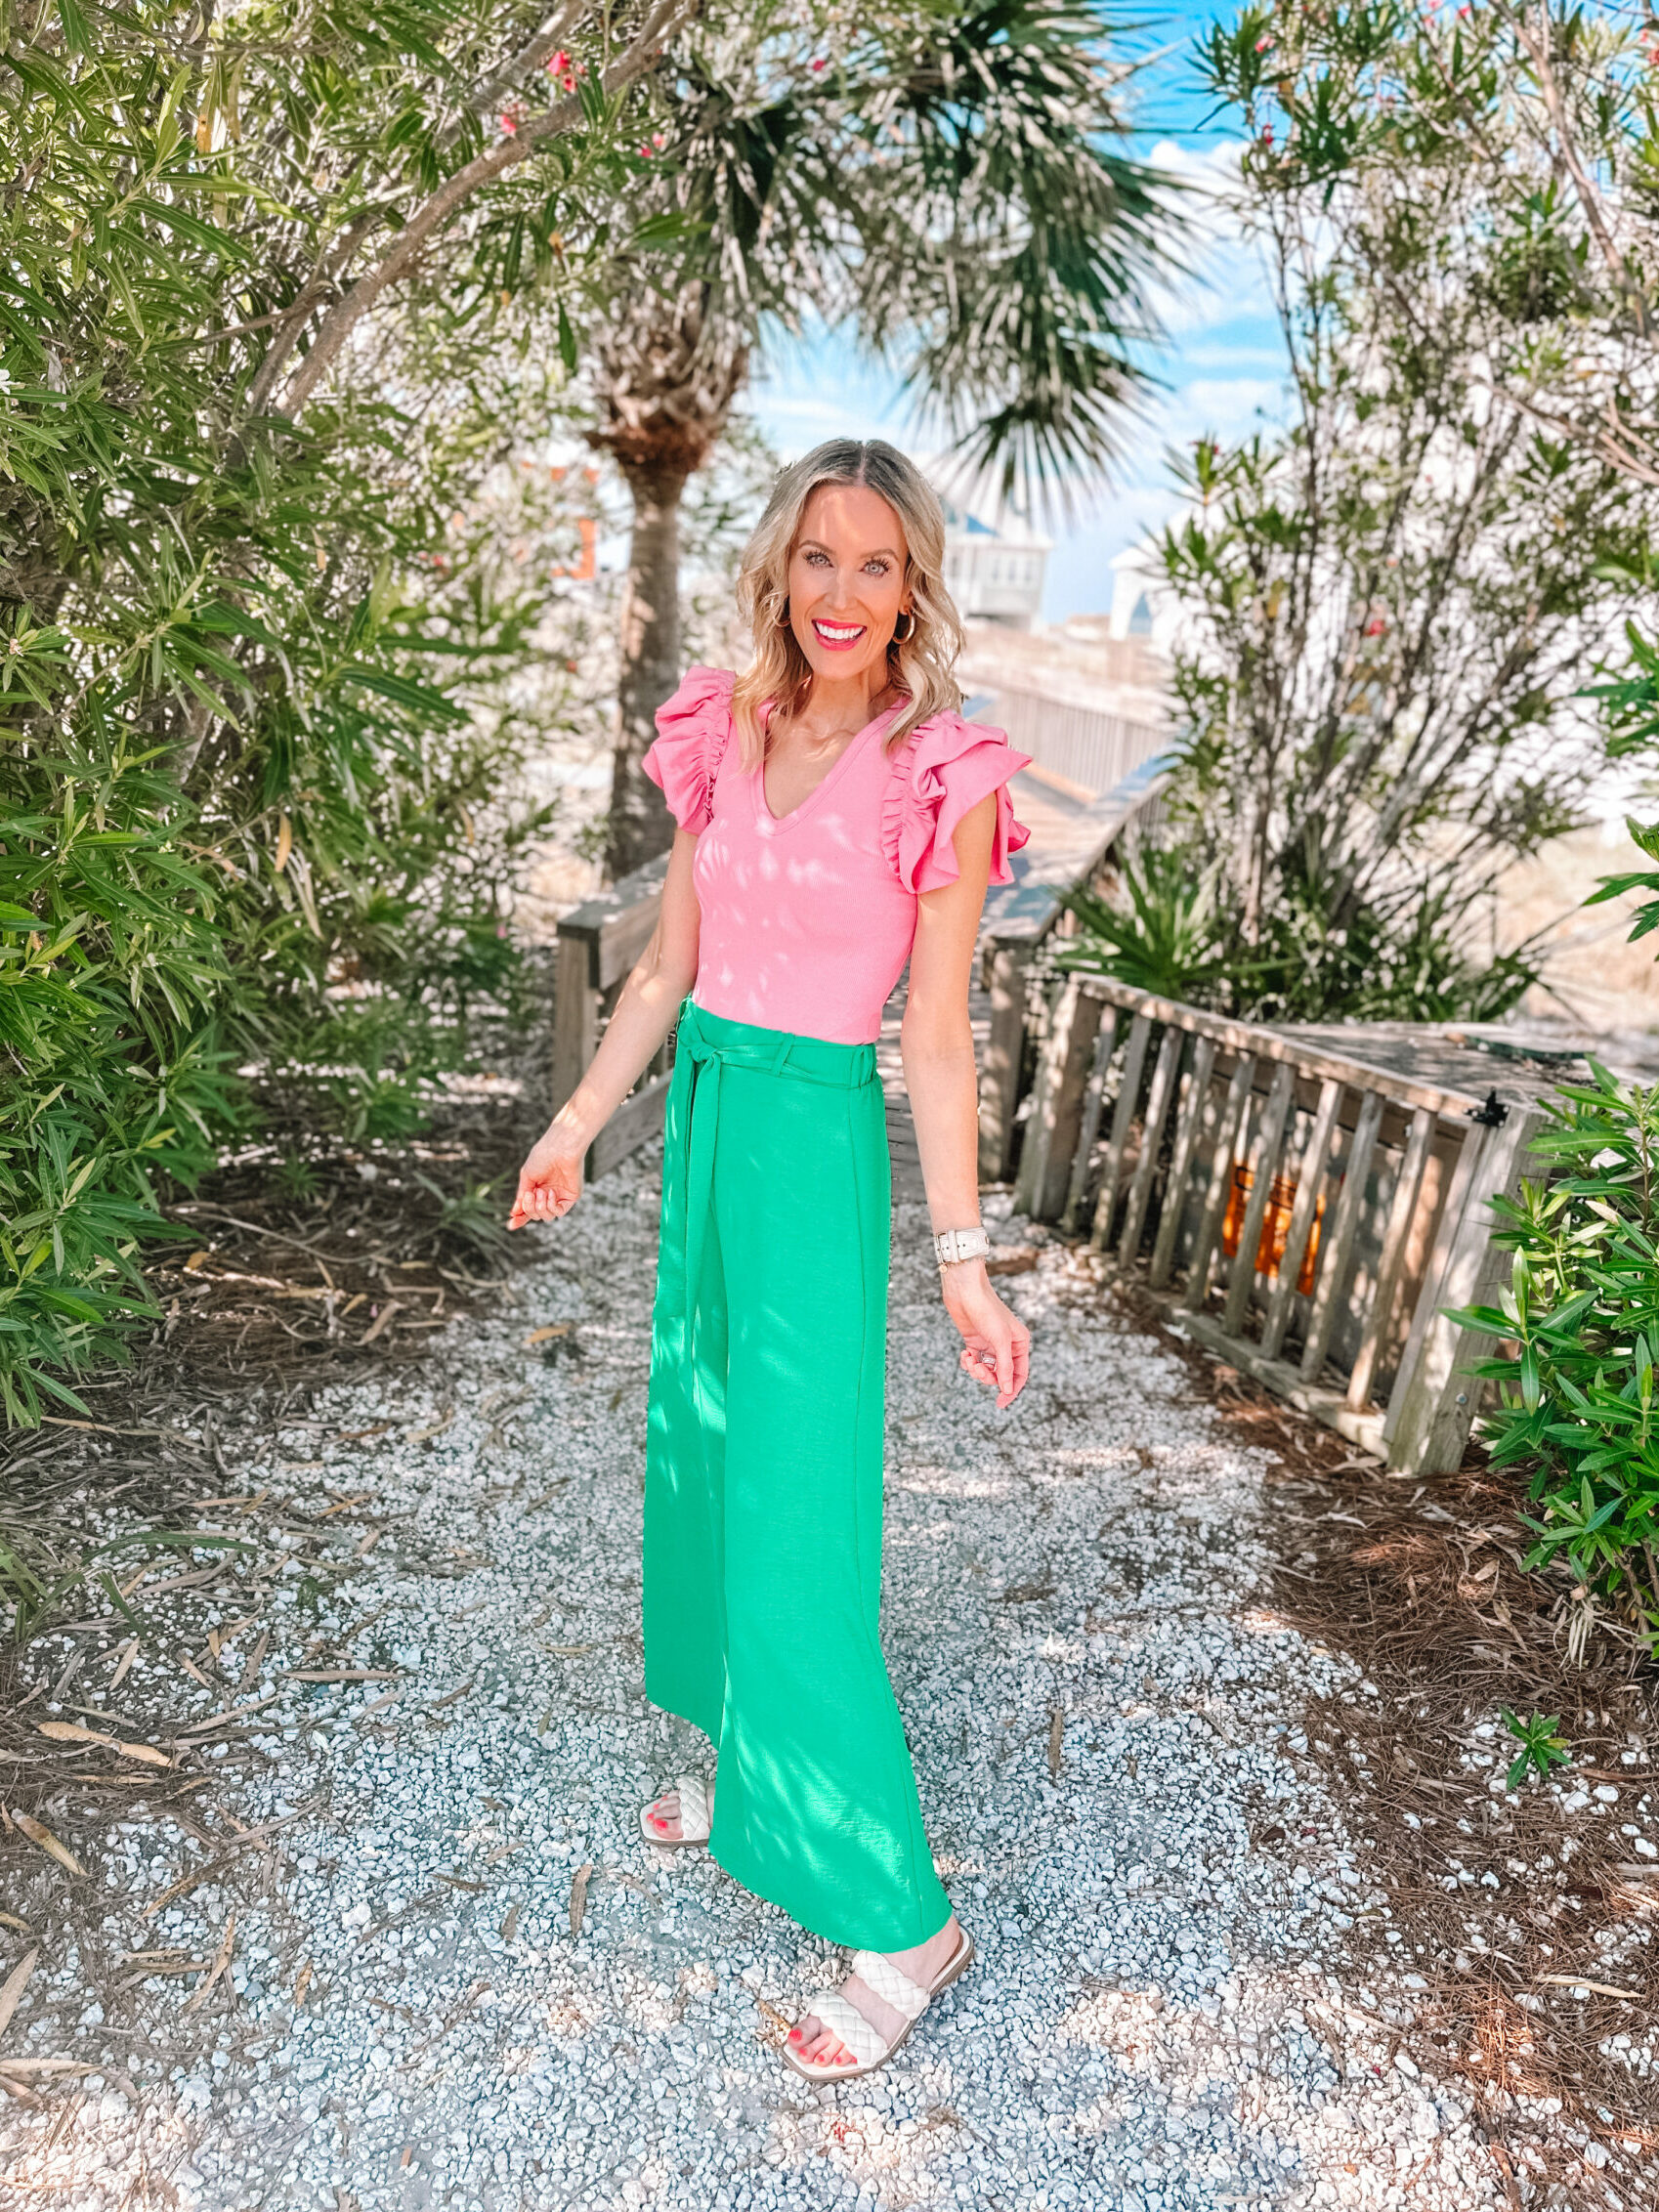 Are you a color lover like me and want some help putting outfits together? Or are you stuck in your neutral loving rut and need some bright inspiration? I have 8 bold outfit color combinations to try that will leave you a color mix master! Pink or coral and green is one of my favorite combinations. 